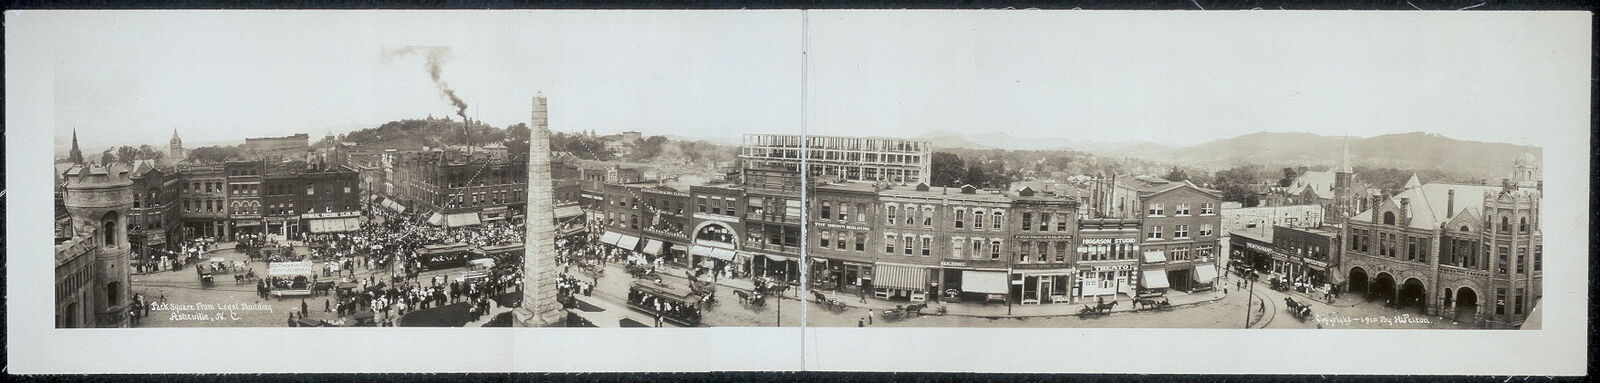 1910 Panoramic: Pack Square from Legal Building,Asheville,North Carolina